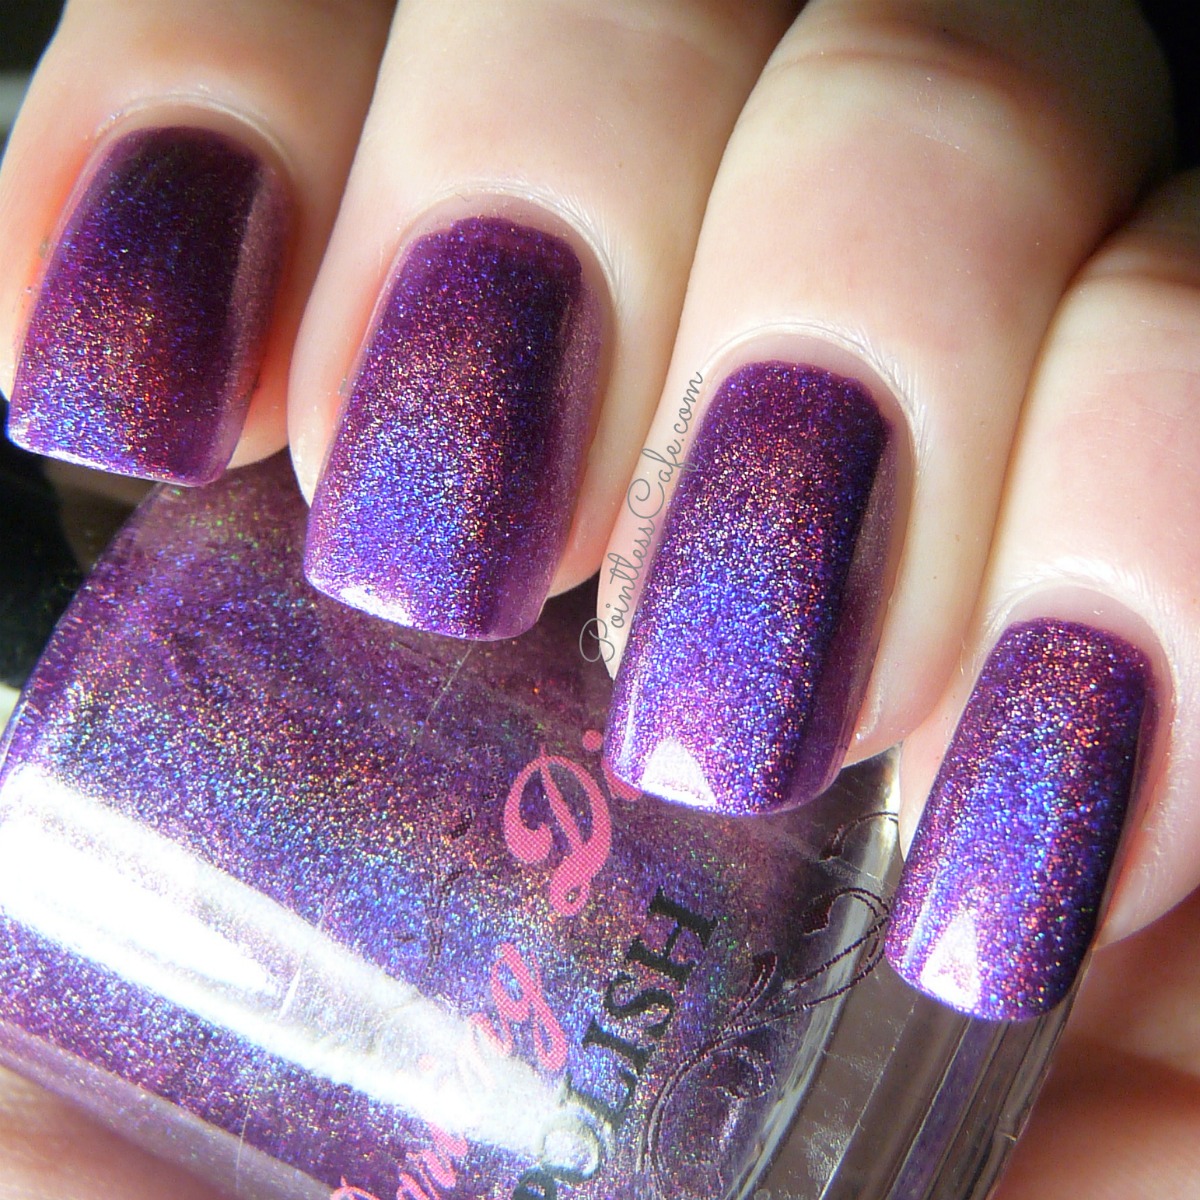 Darling Diva Polish: Stand Back - Swatches and Review | Pointless Cafe